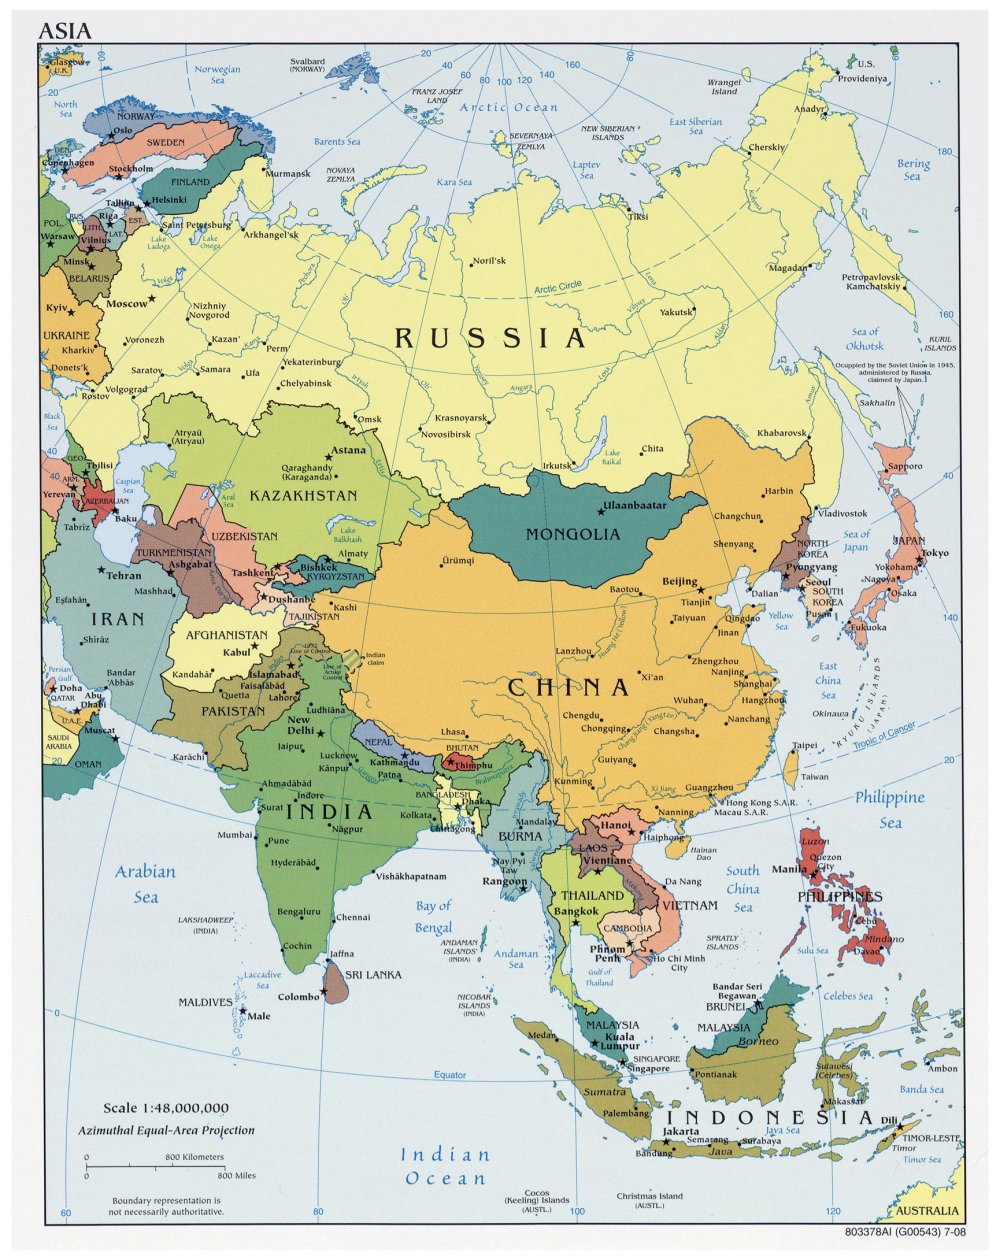 27212331-23-asia-map